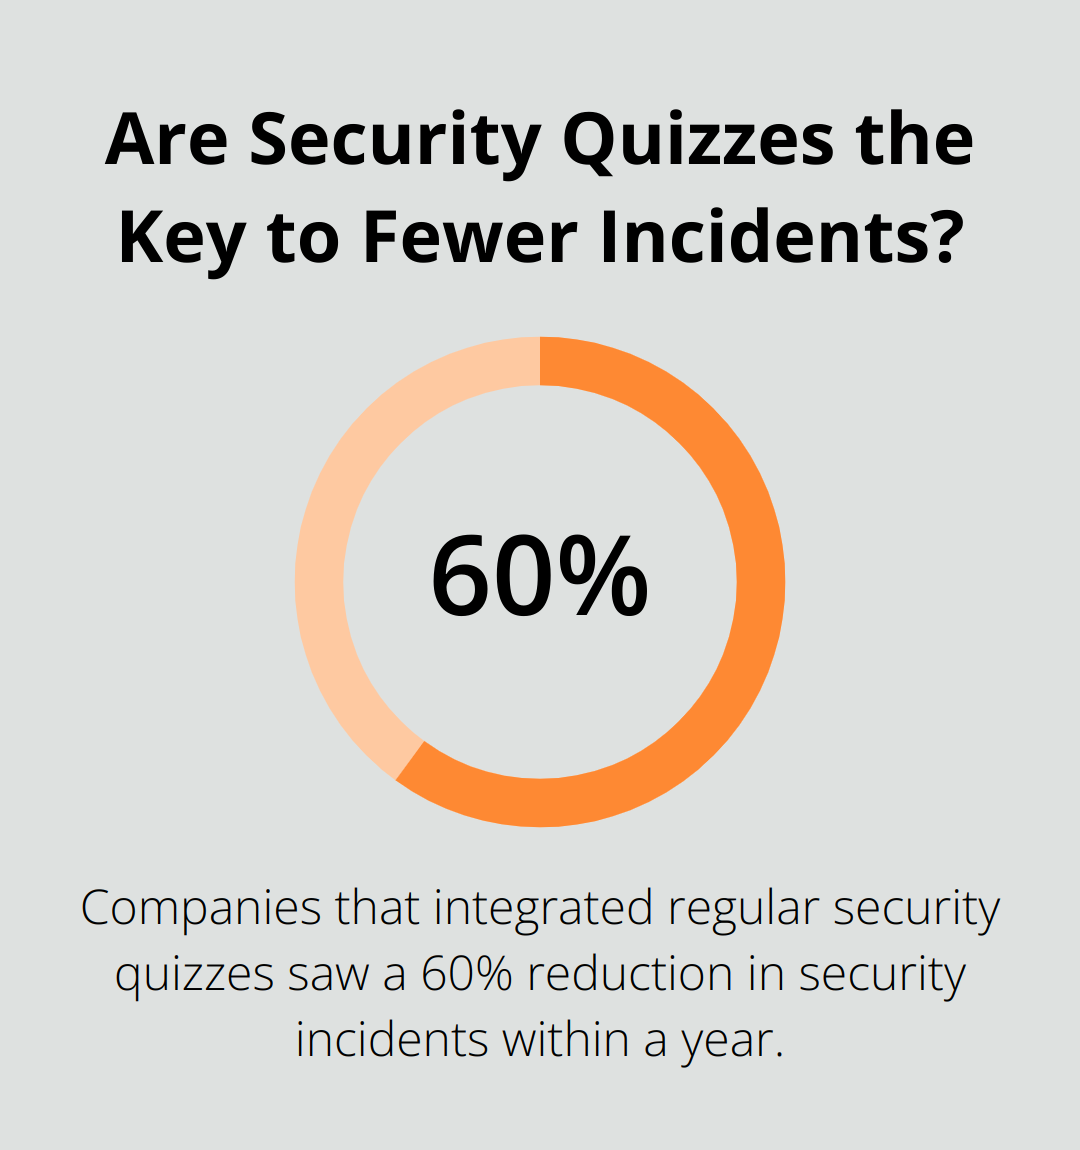 Are Security Quizzes the Key to Fewer Incidents?